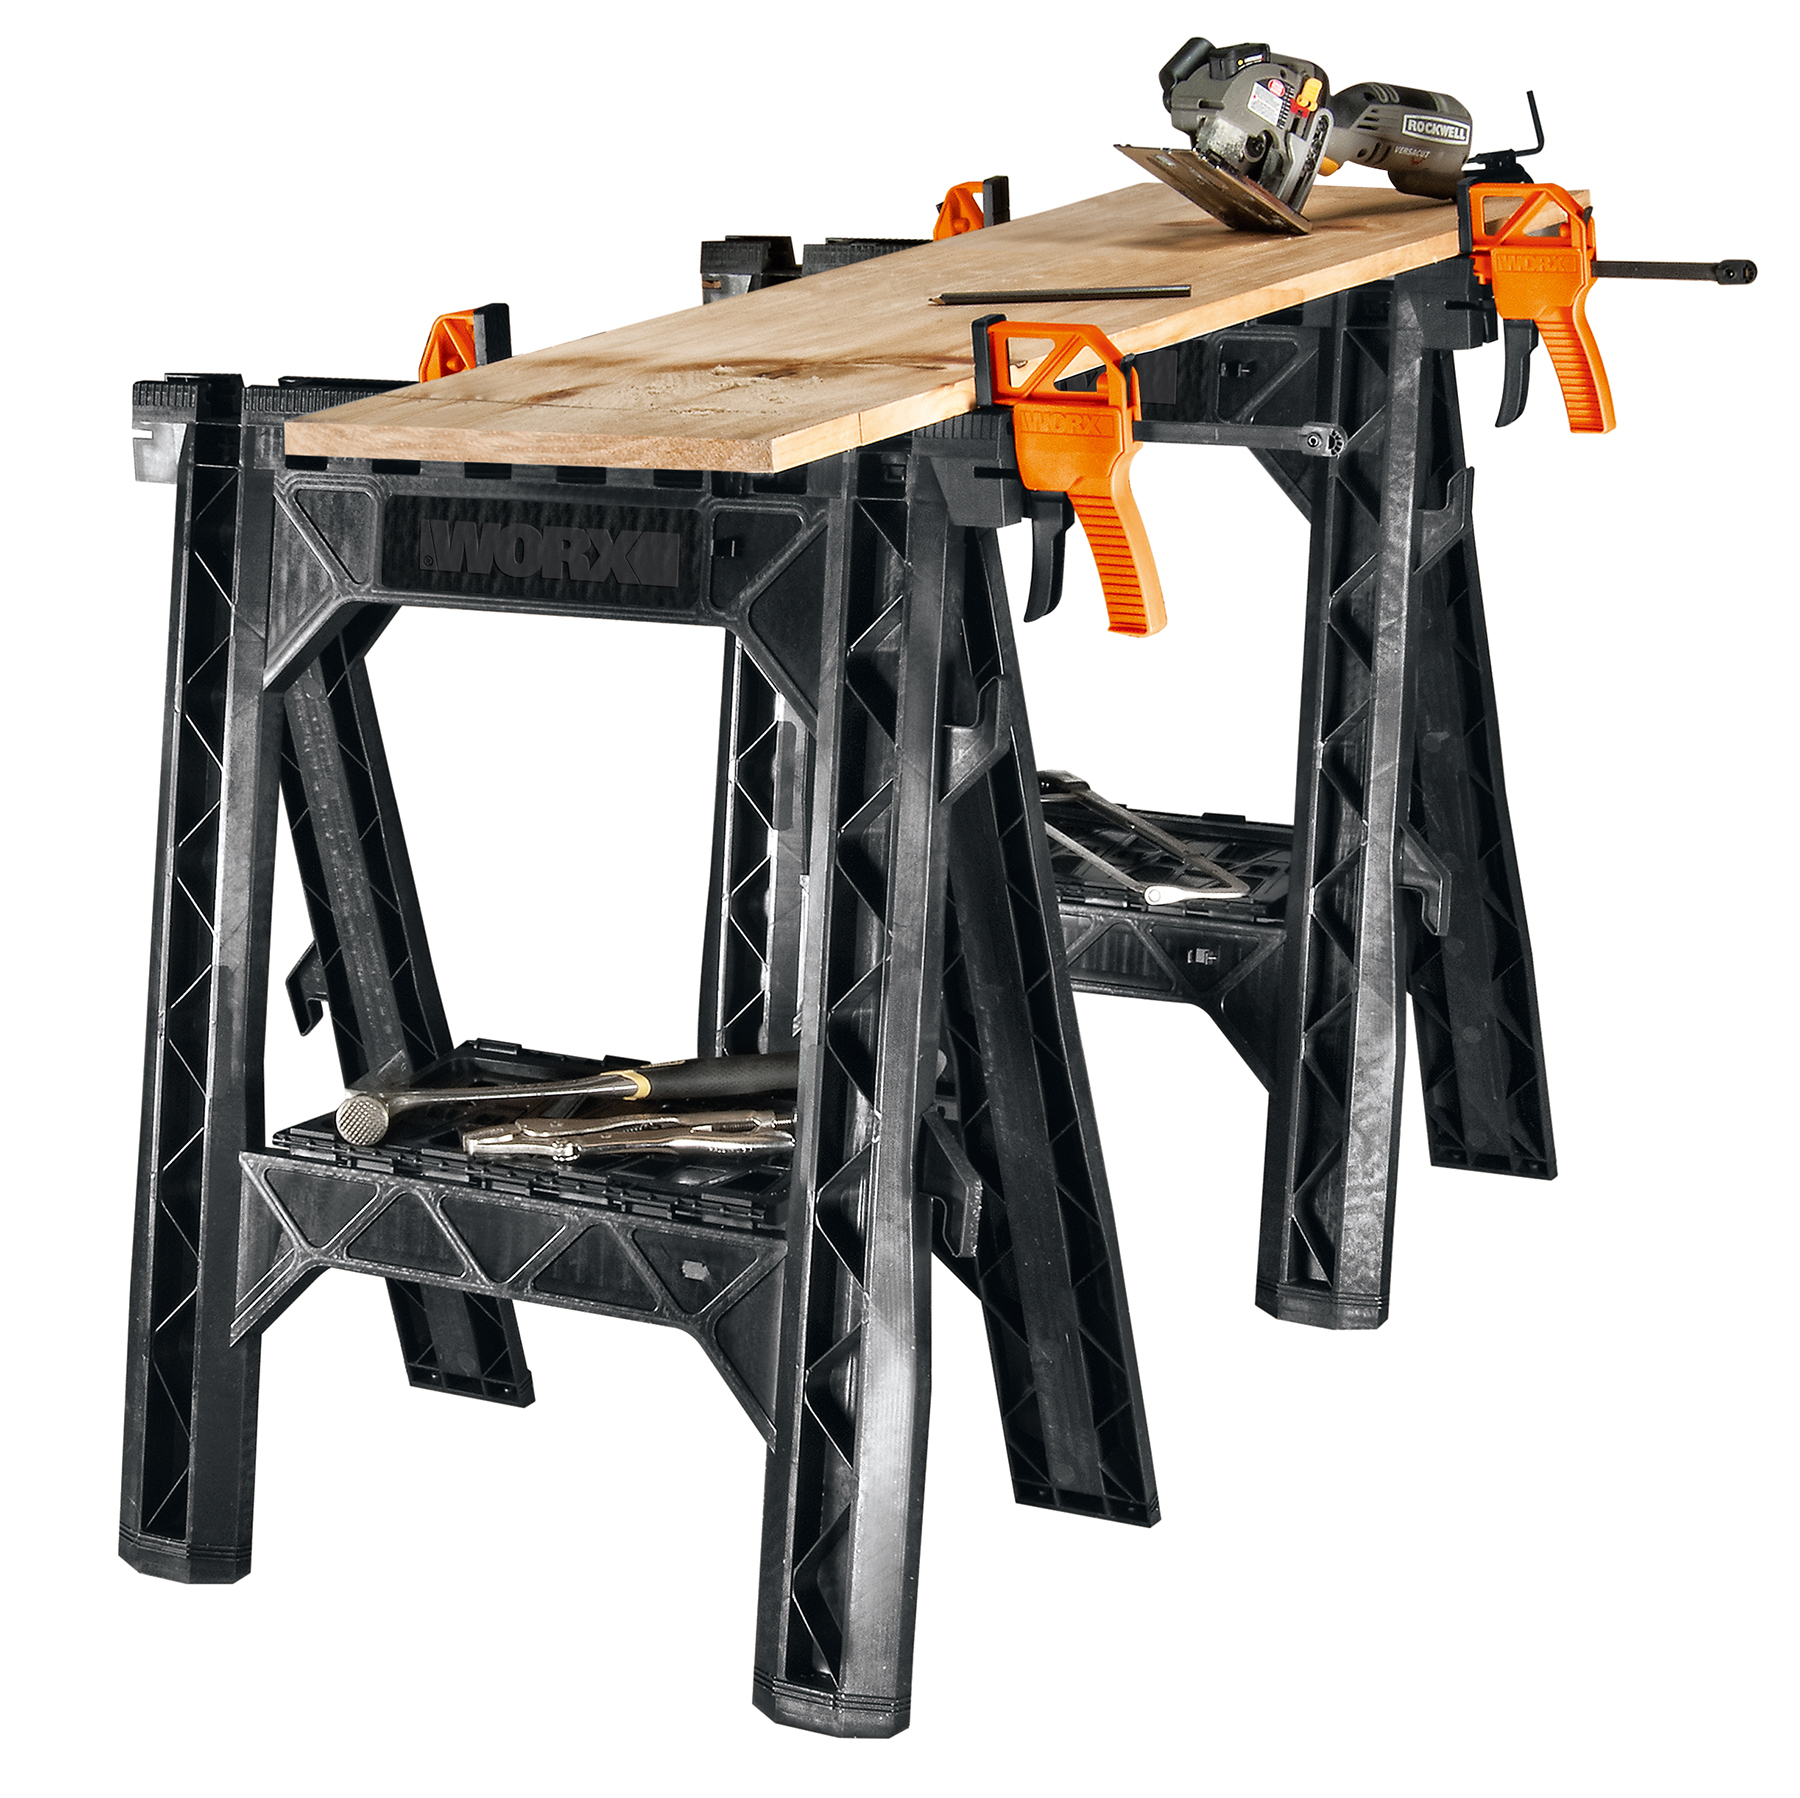 WORX Clamping Sawhorses have 32 inch working height and include storage shelves and cord wraps.